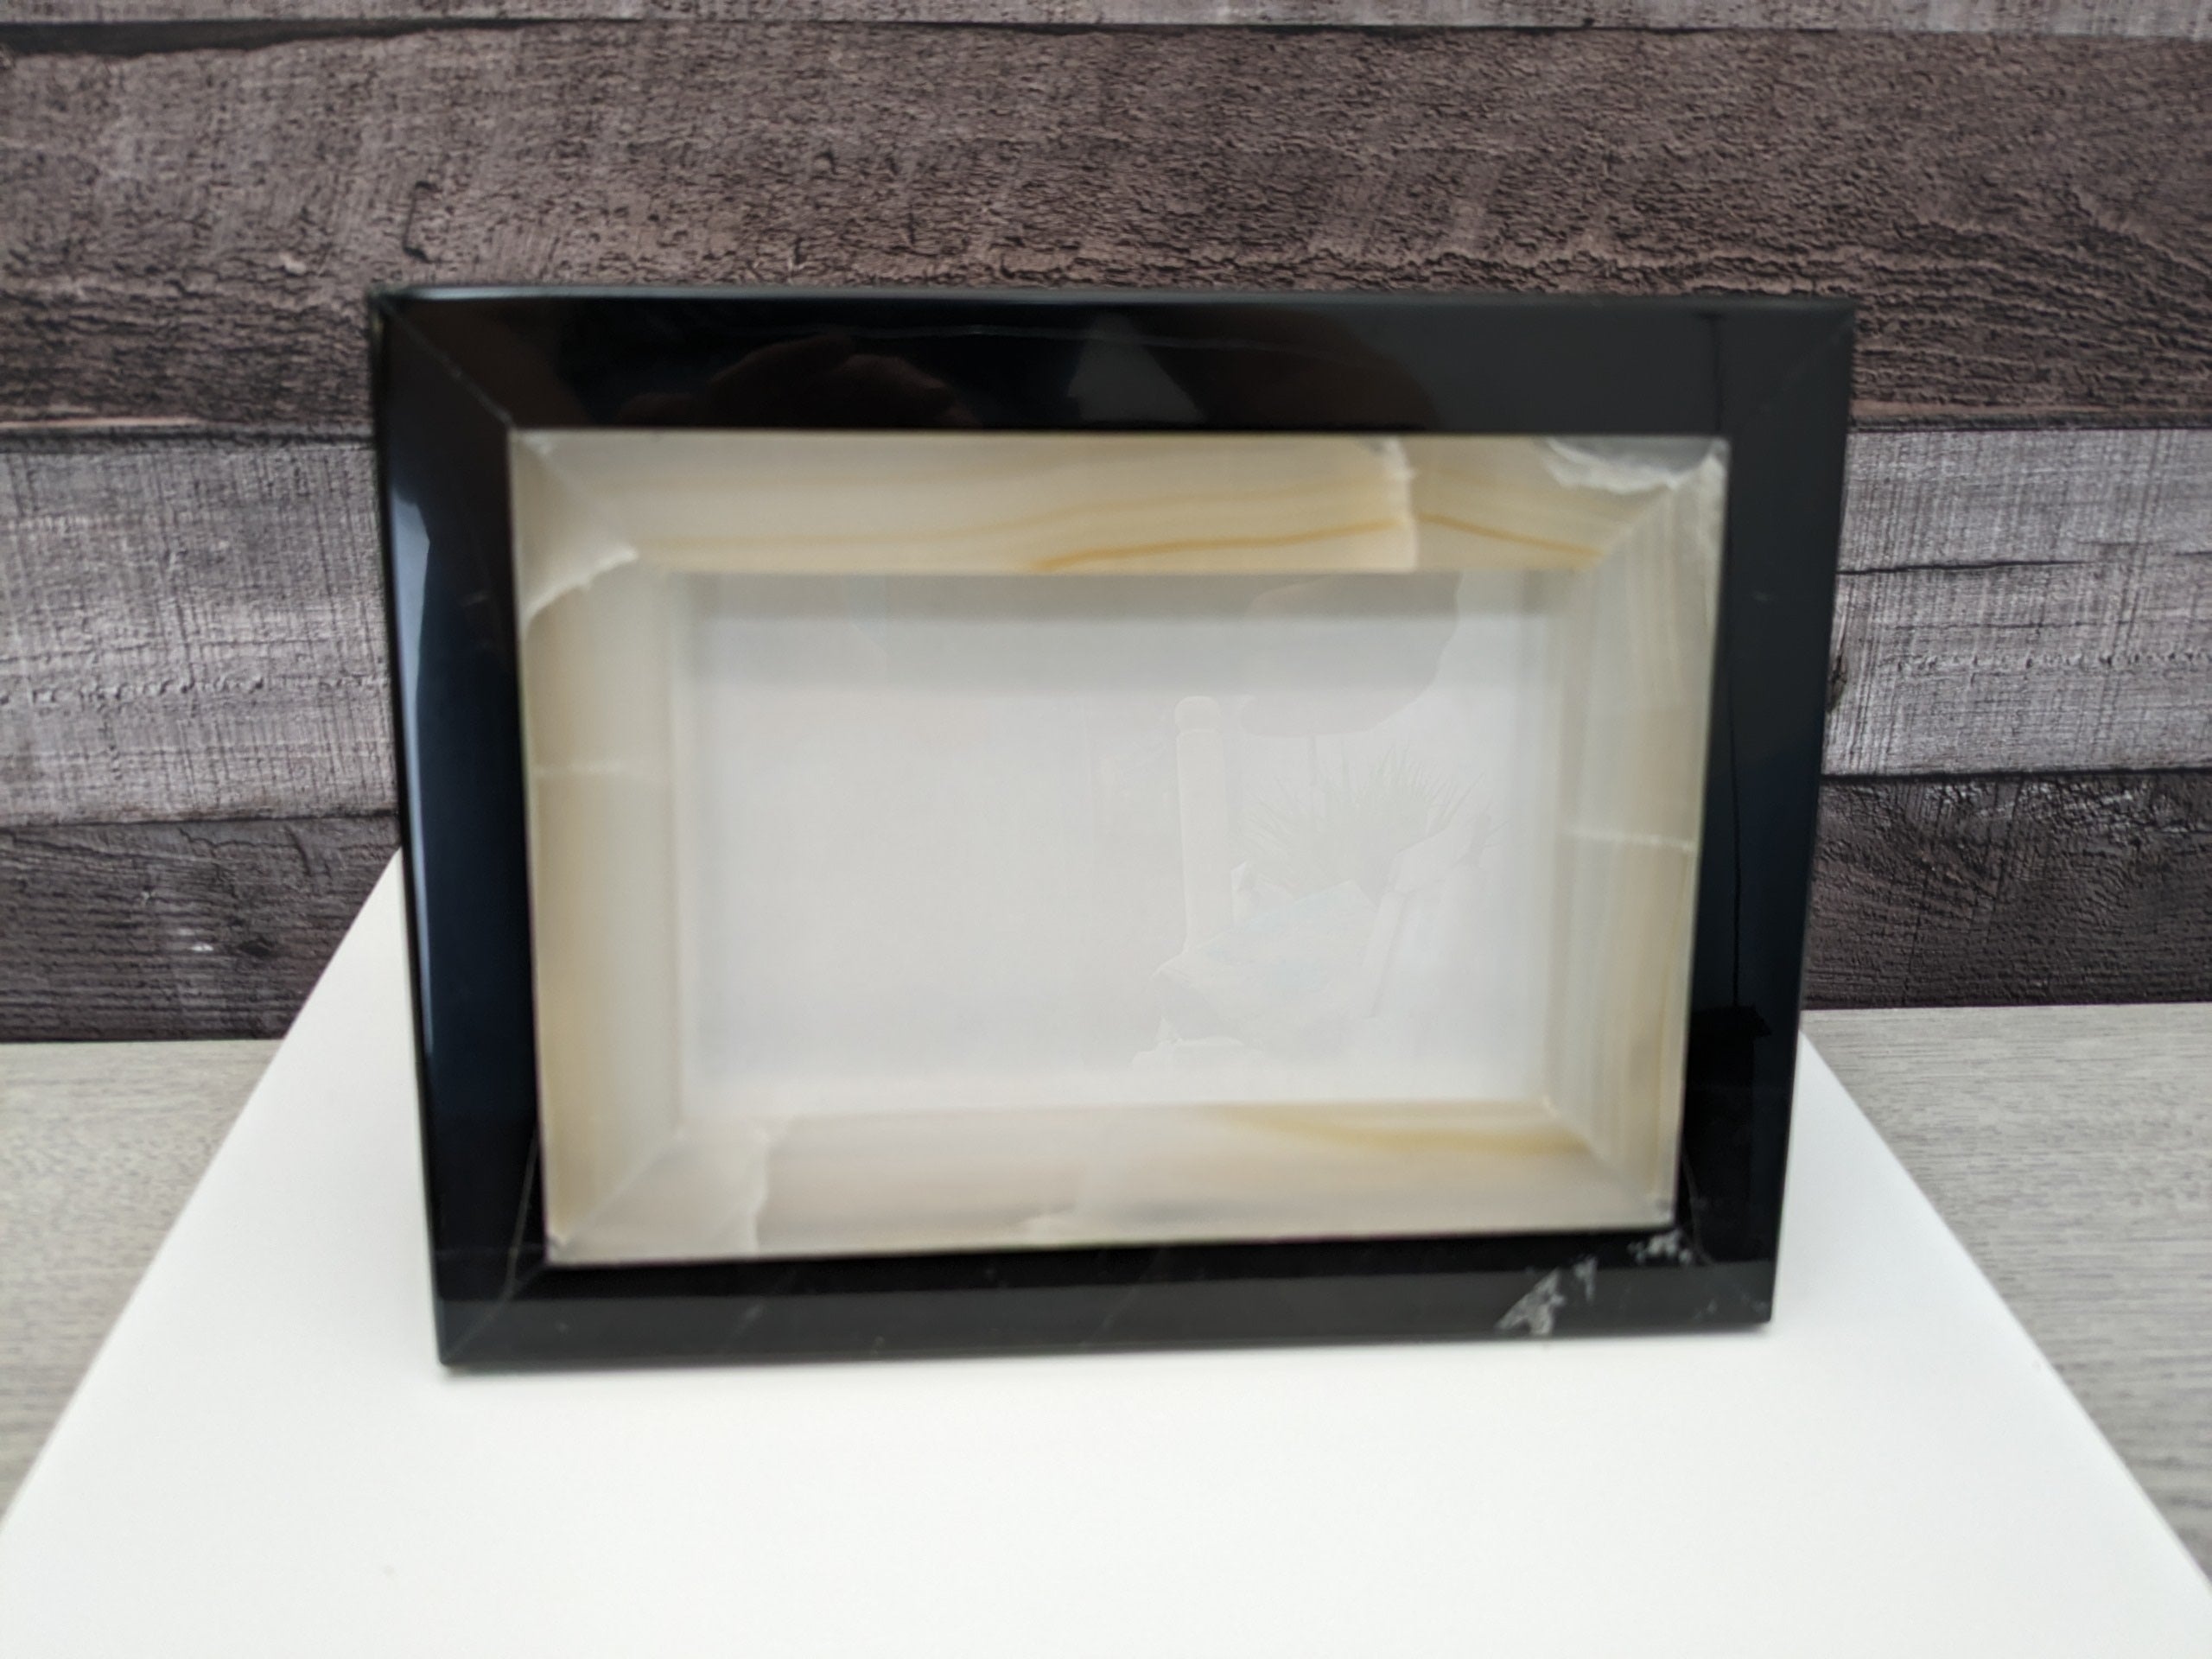 Black and White Onyx Frame with Glass Covering and a Travertine Stone Stand. Handmade in Mexico. We package and ship from the USA. Buy now at www.felipeandgrace.com.